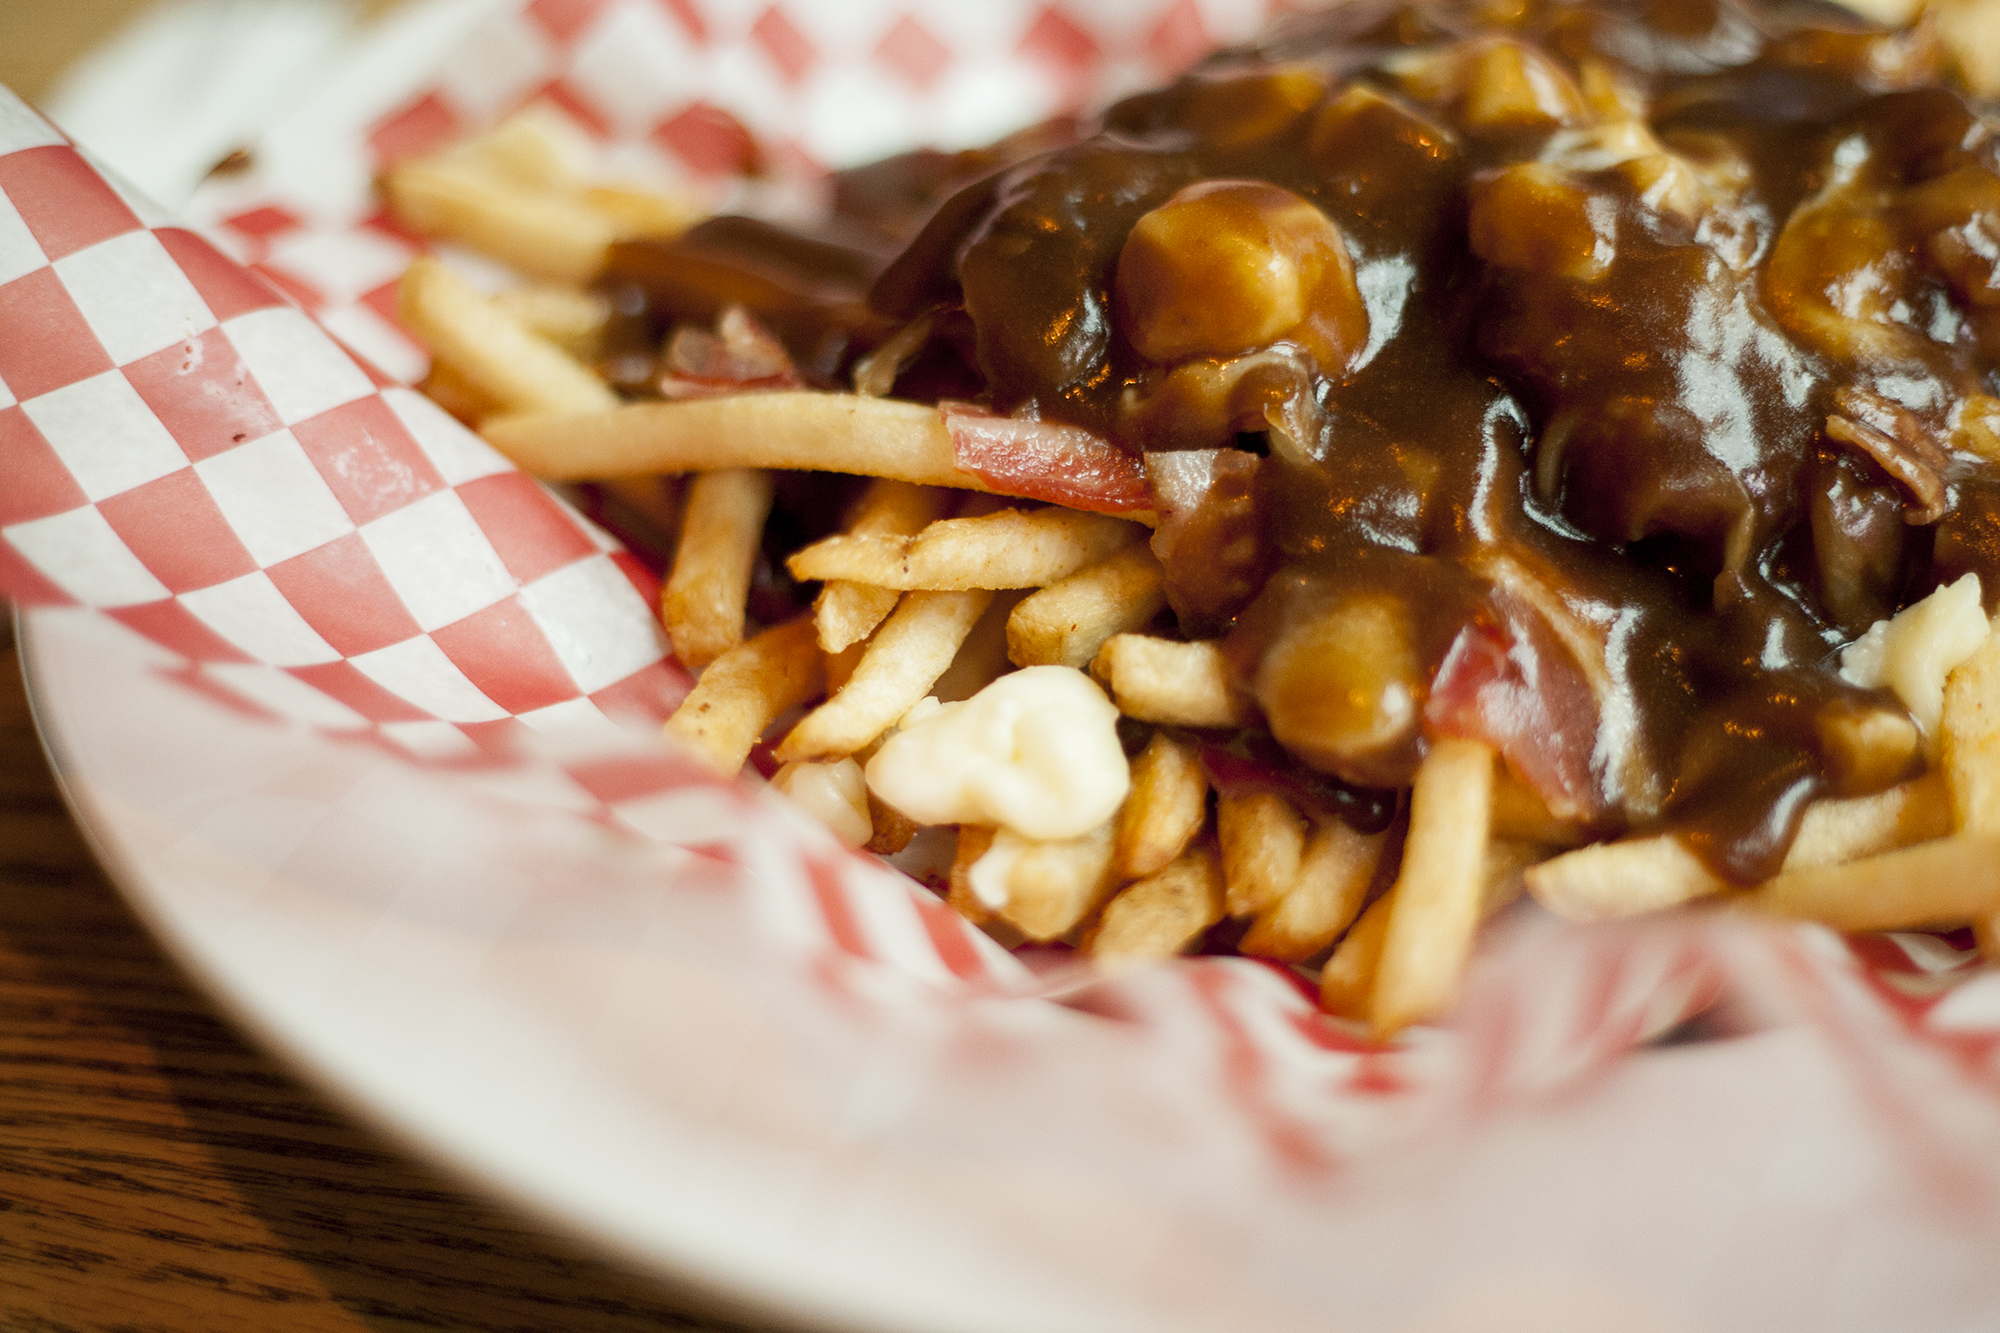 Poutine served at Tapley's.